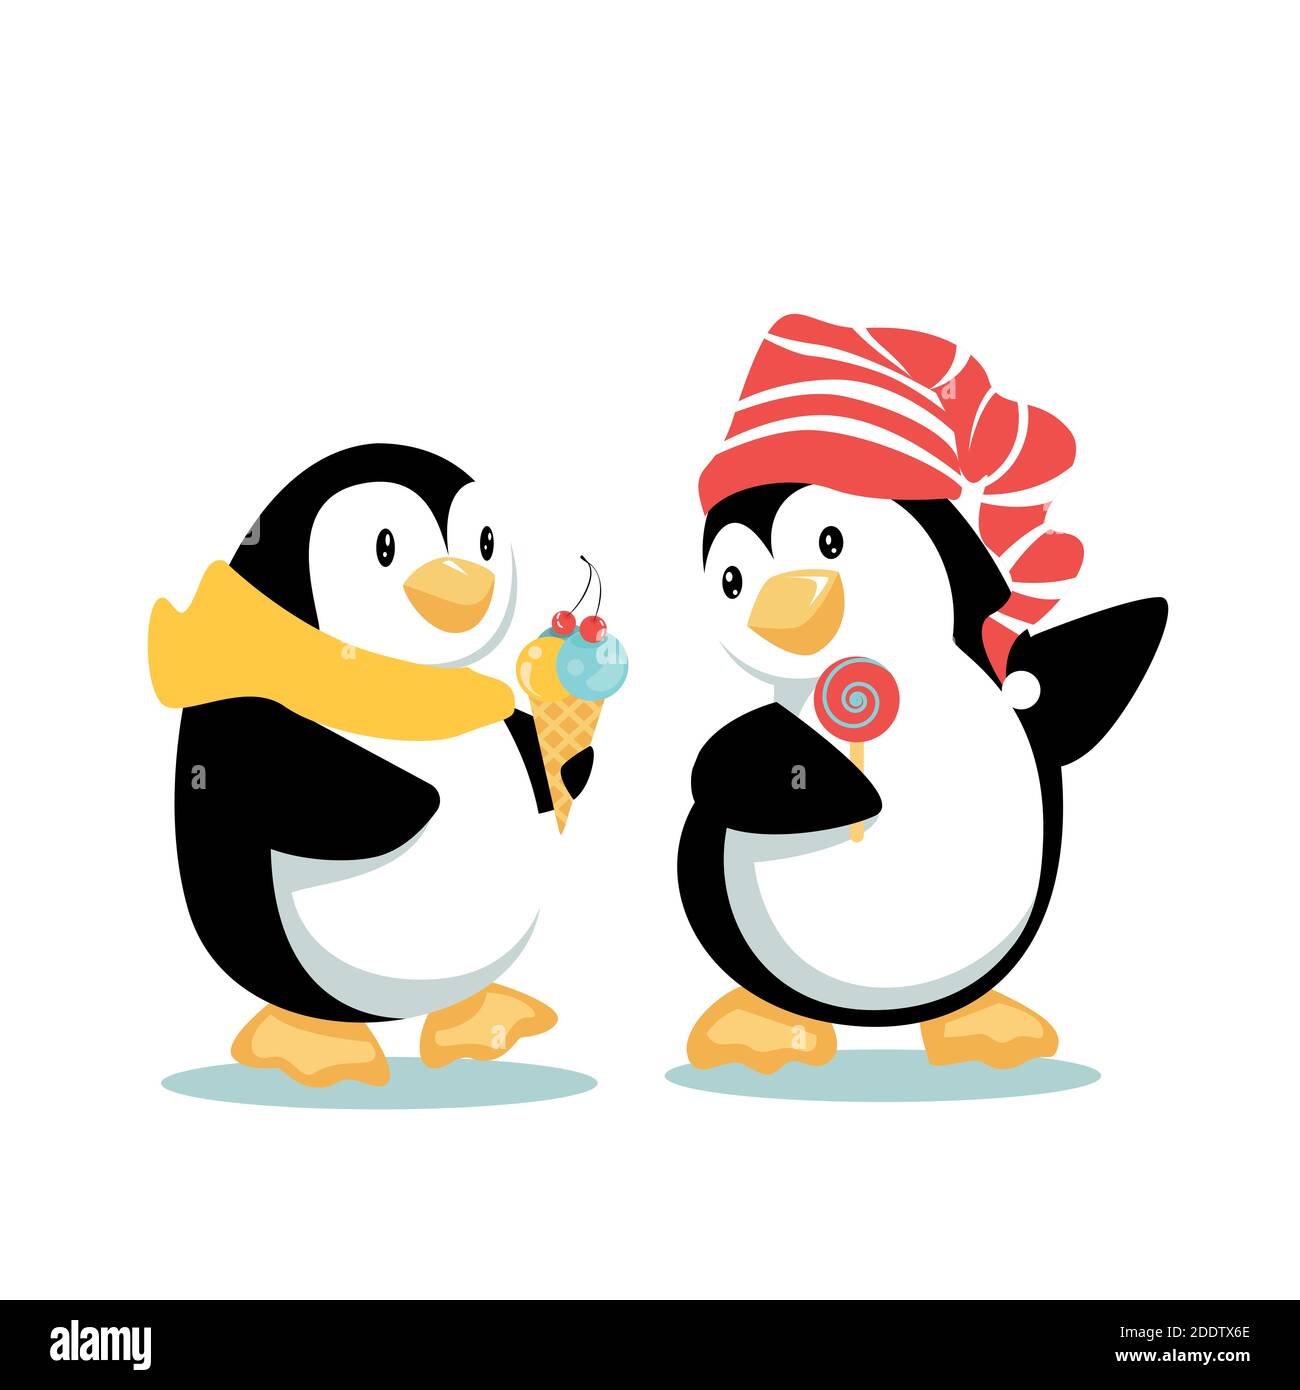 Penguin Friends Walk Chatting and Eating Snacks Stock Vector